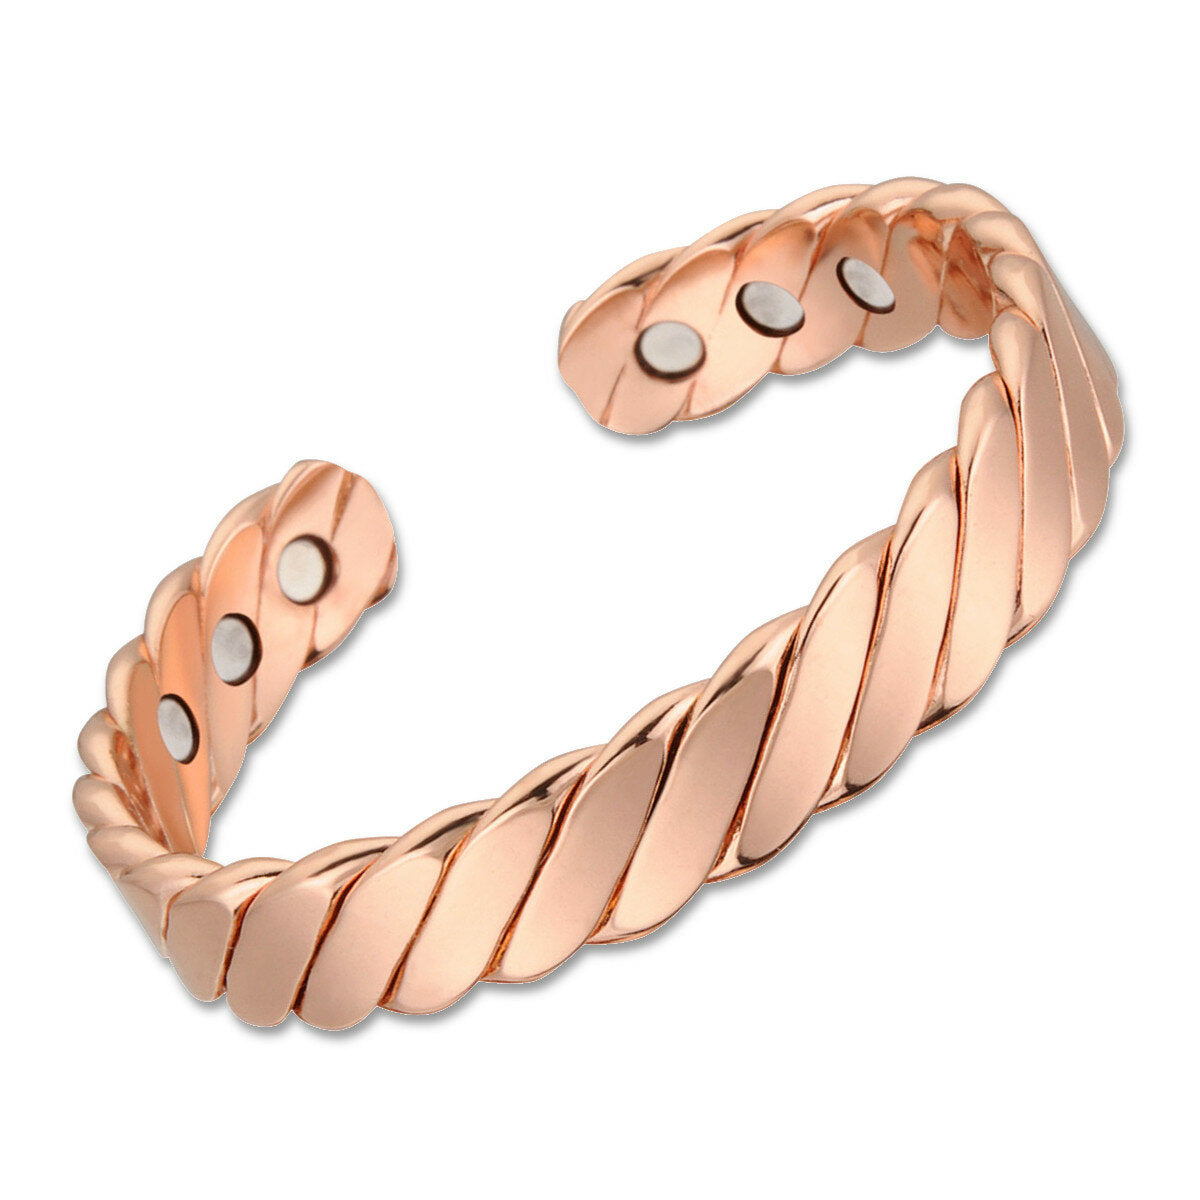 Fashion Rose Gold Magnetic Bracelet Neodymium Magnet Therapy Pain Relief Health Care Copper Bangle